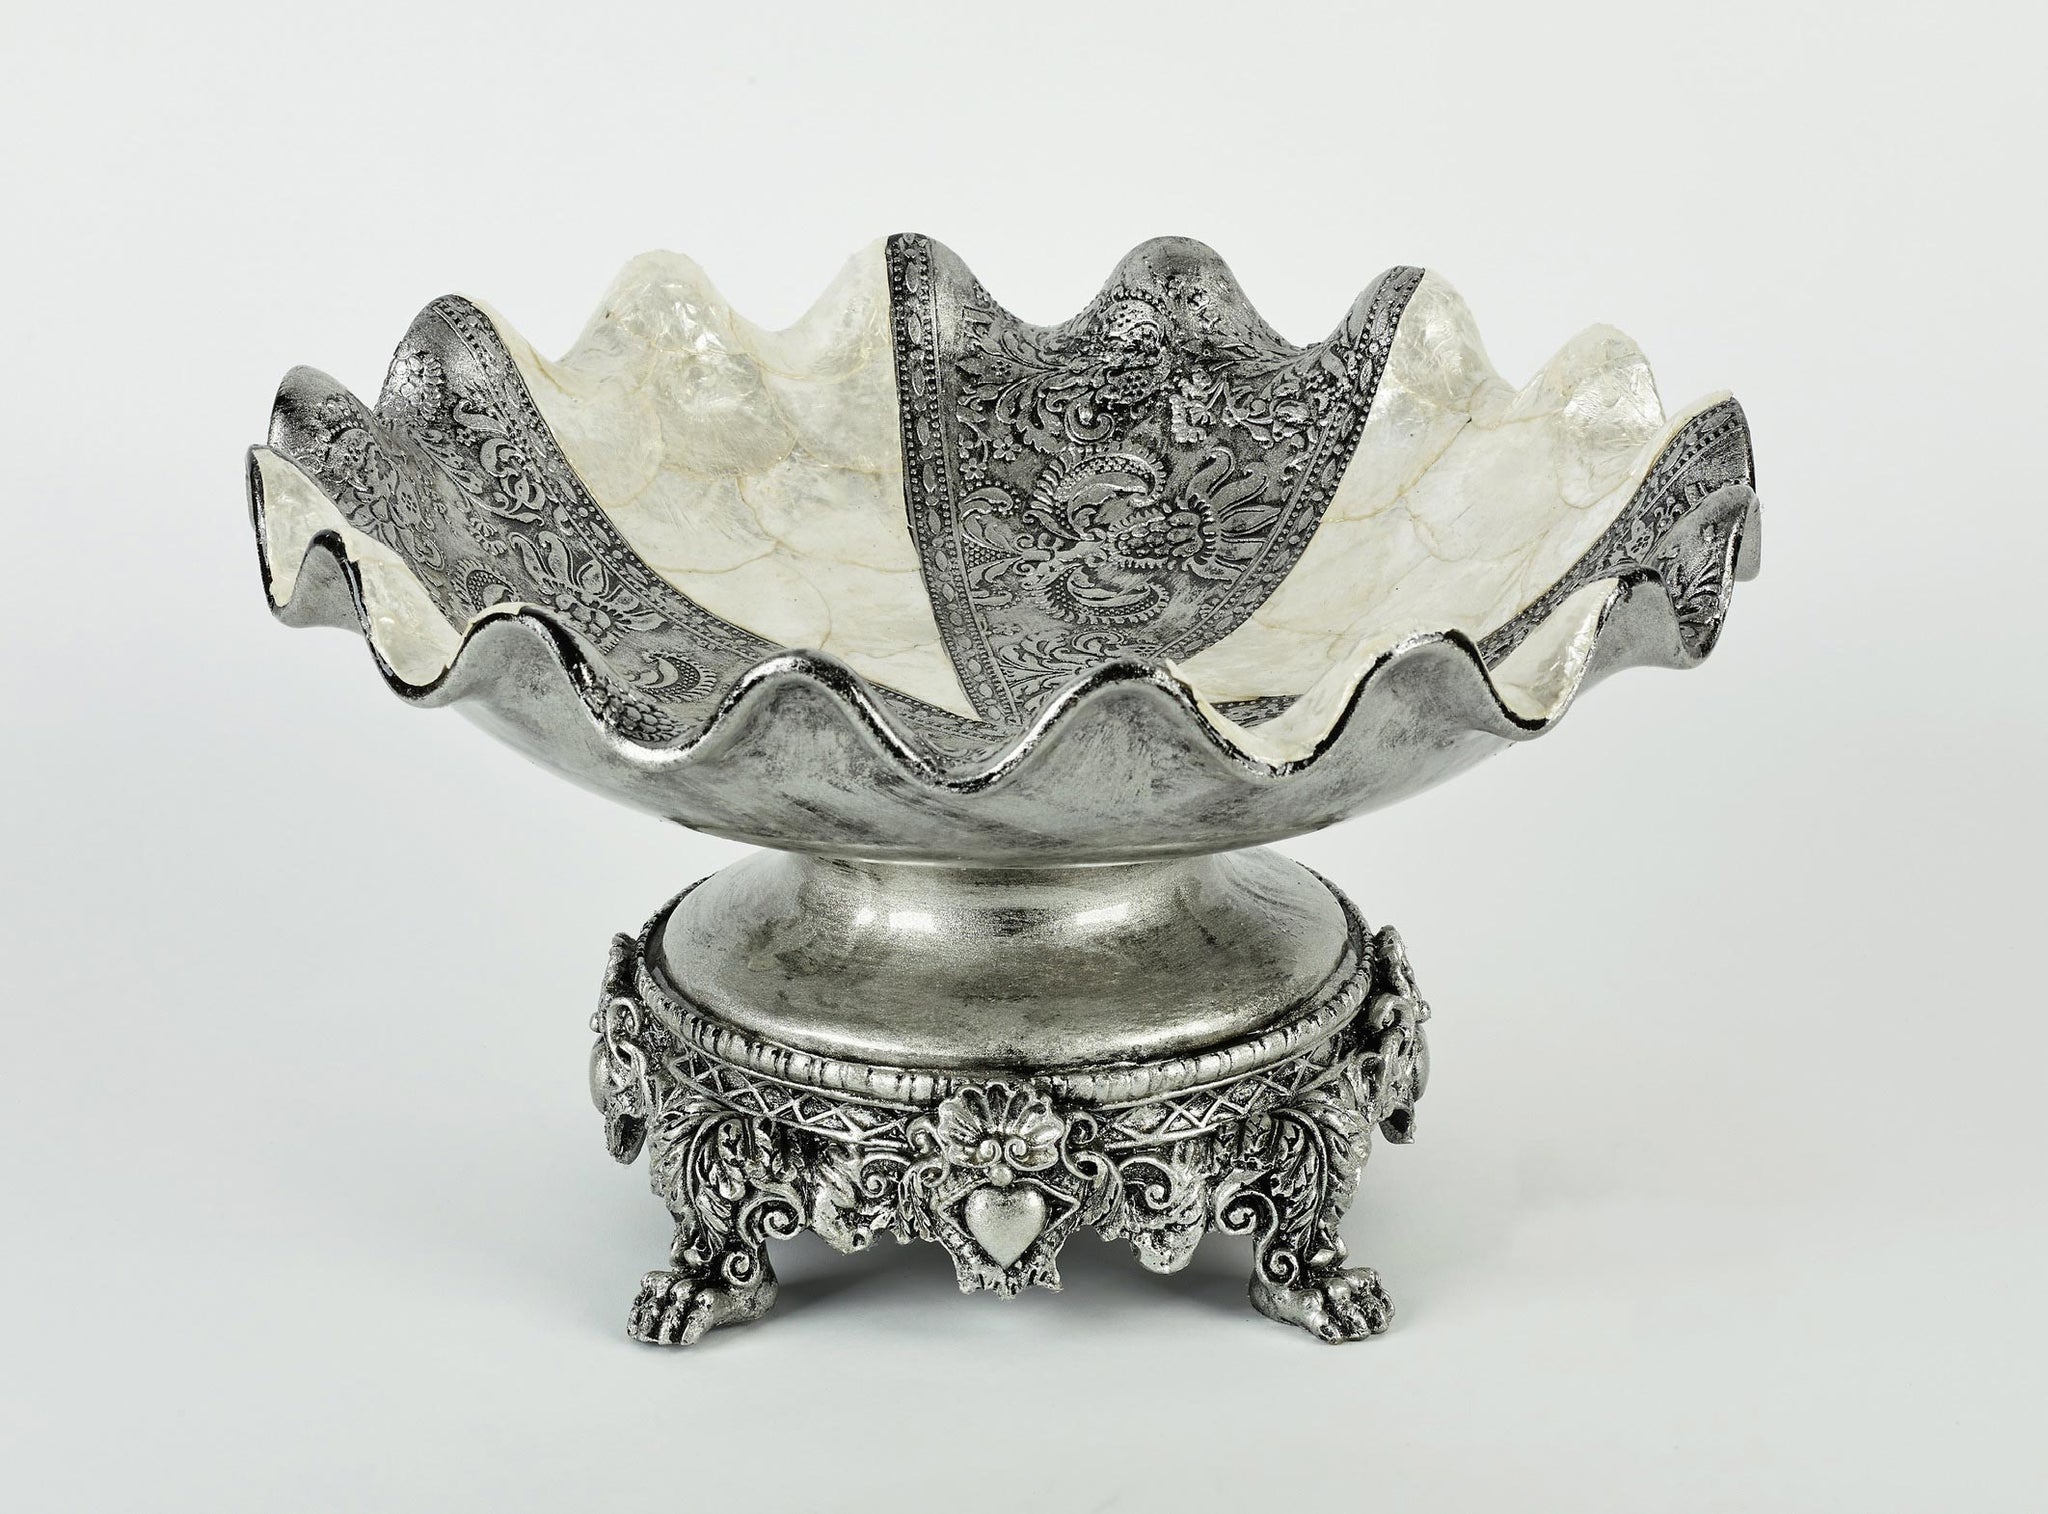 Decorative Ceramic Bowl with Silver Base